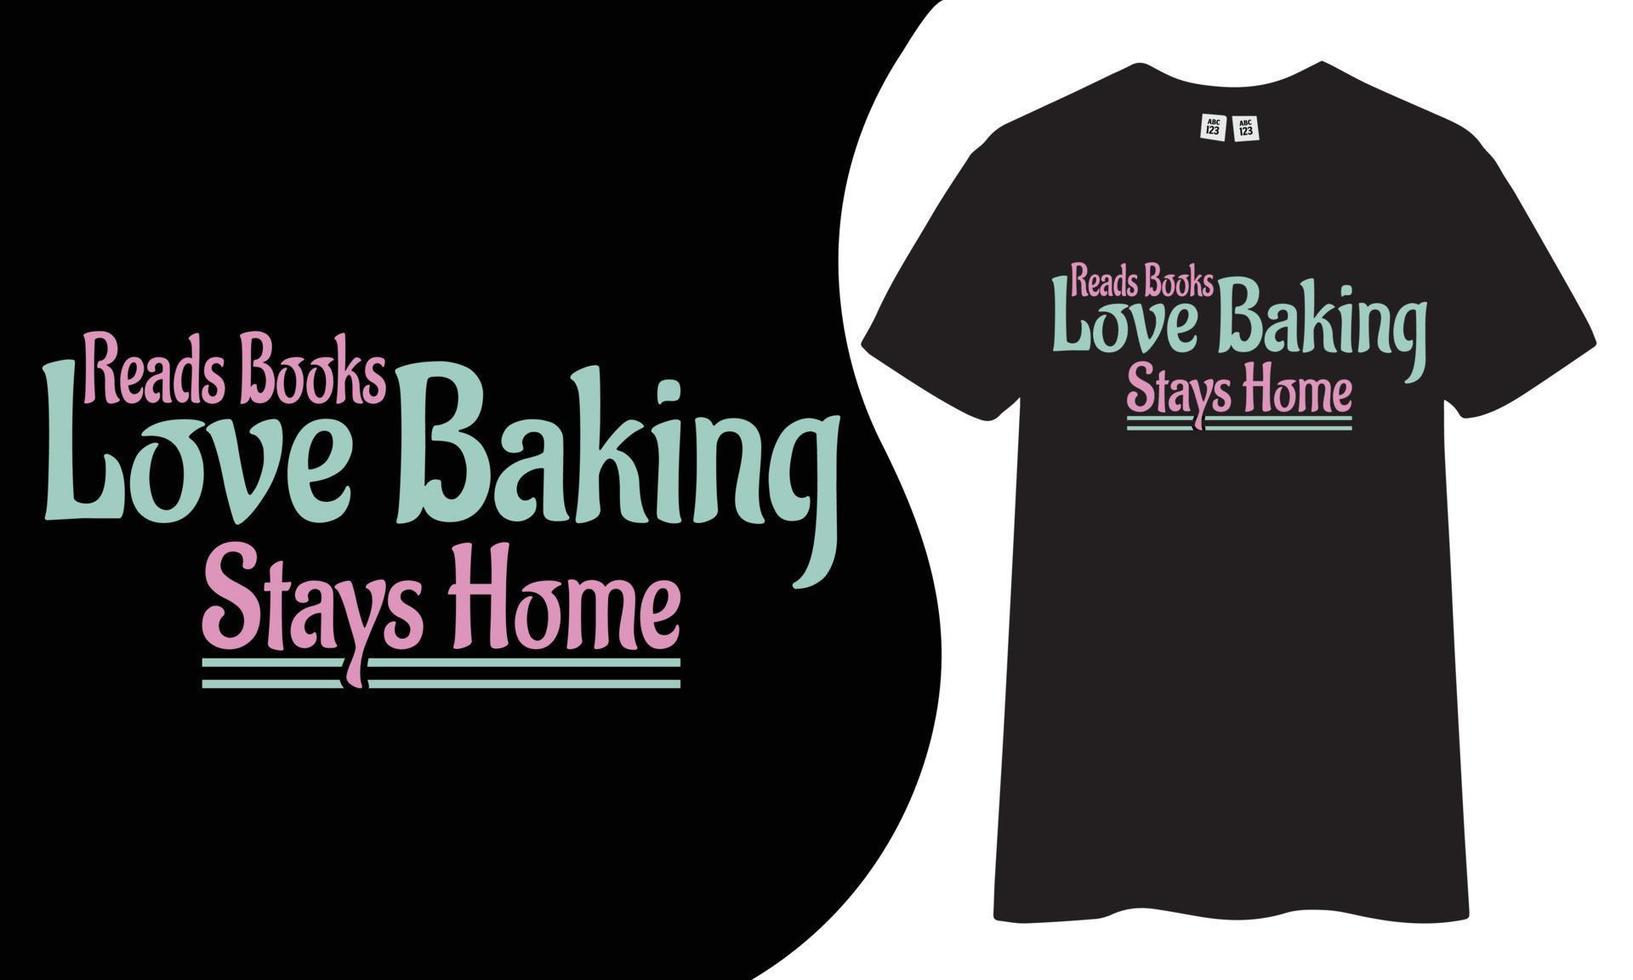 Reads book love baking stays home t shirt design. vector